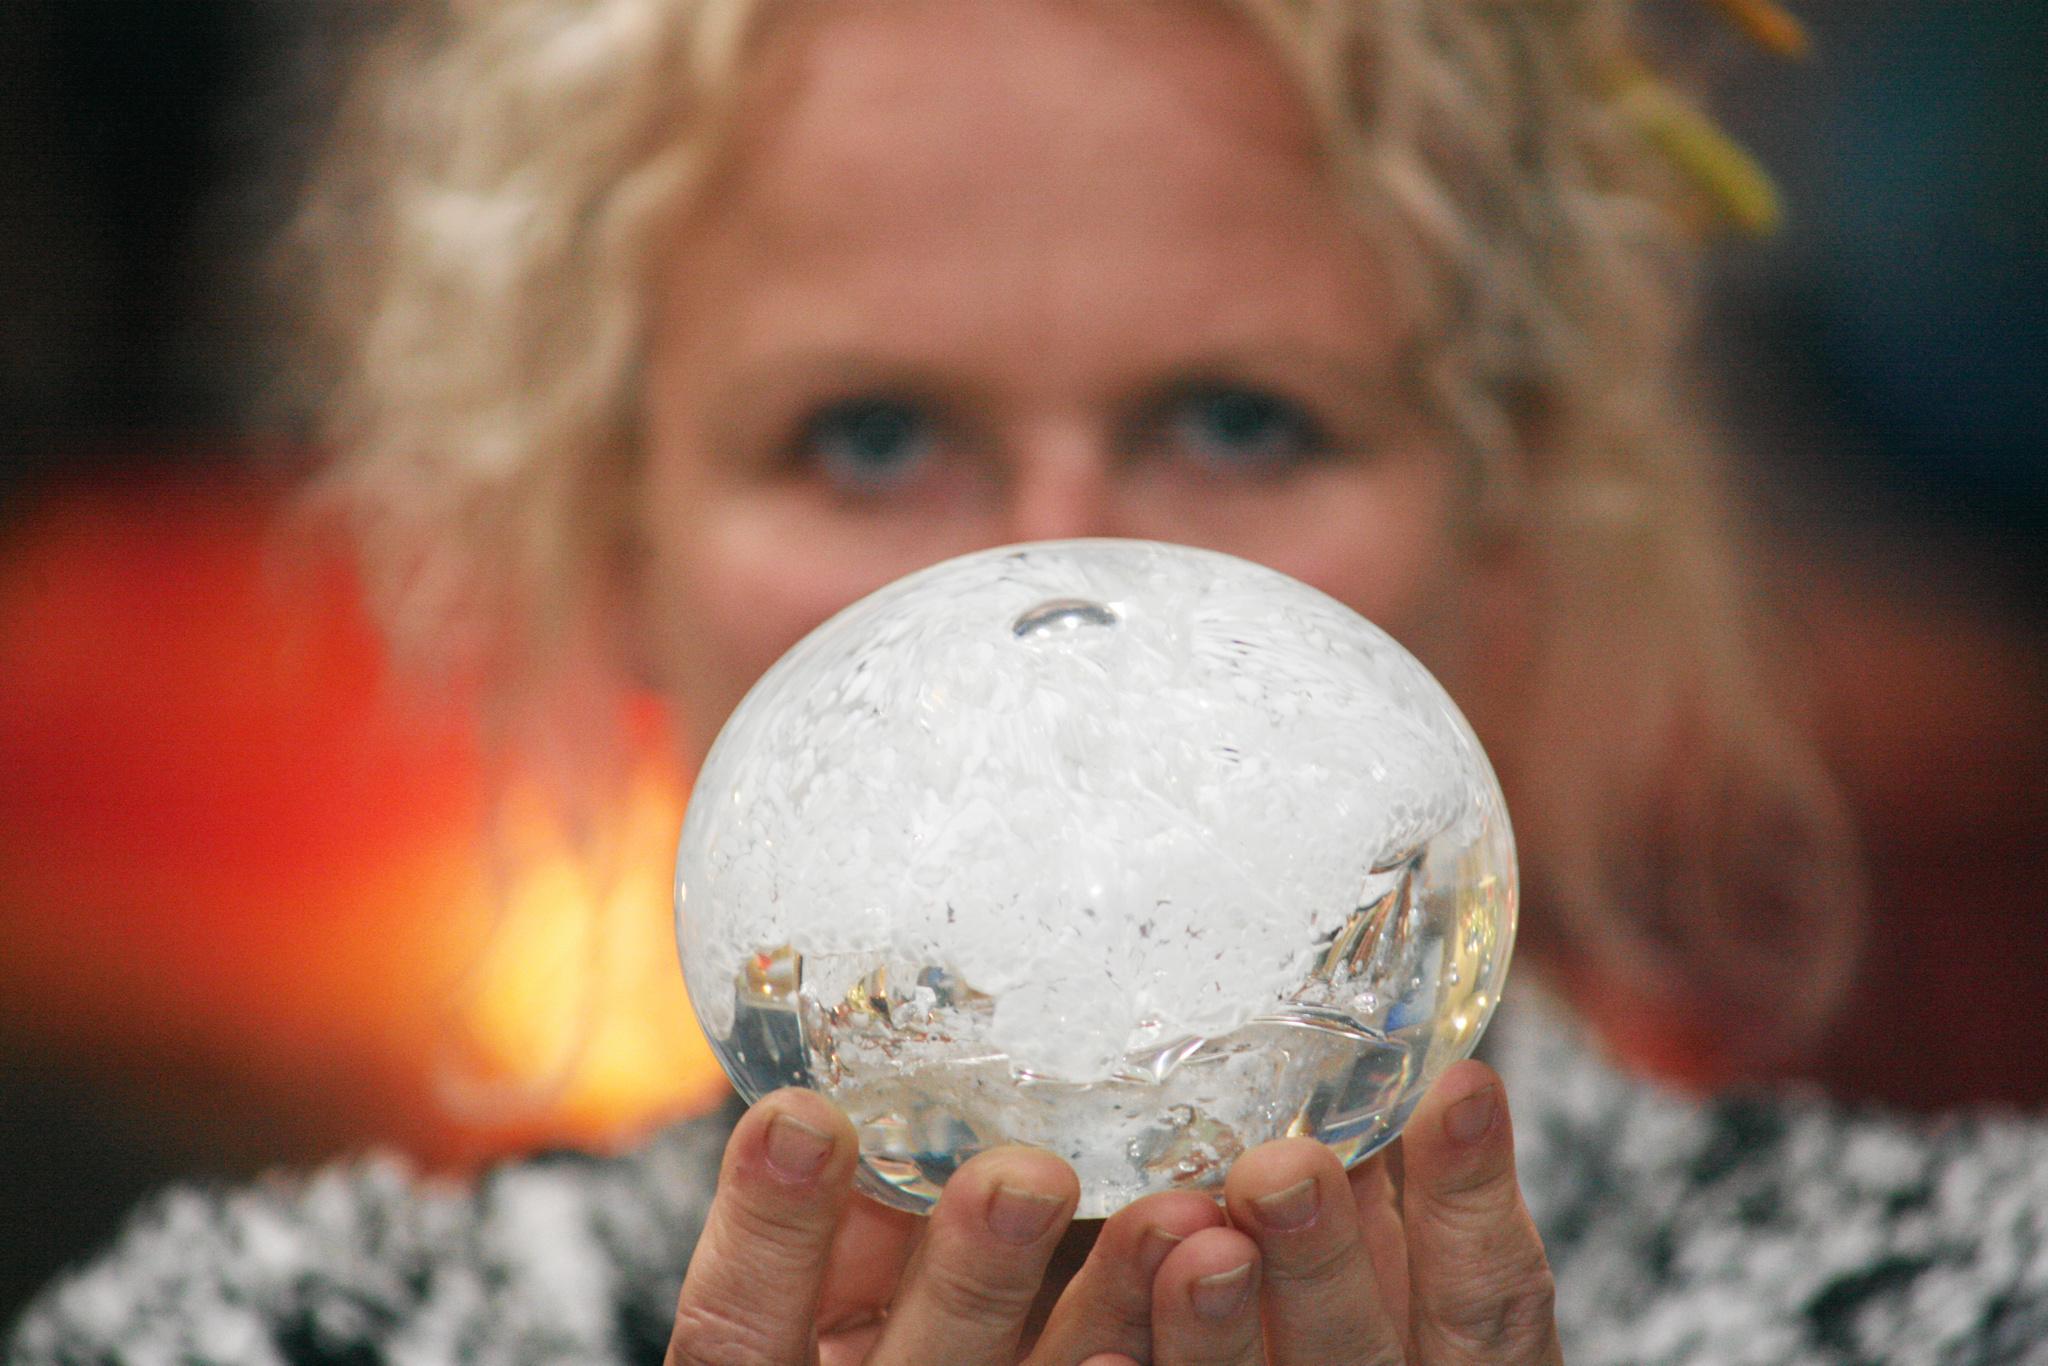 Montville glass artist Tina Cooper with one of her "Forever Yours" Memorial Orbs. Photo: Darryn Smith / Sunshine Coast Daily